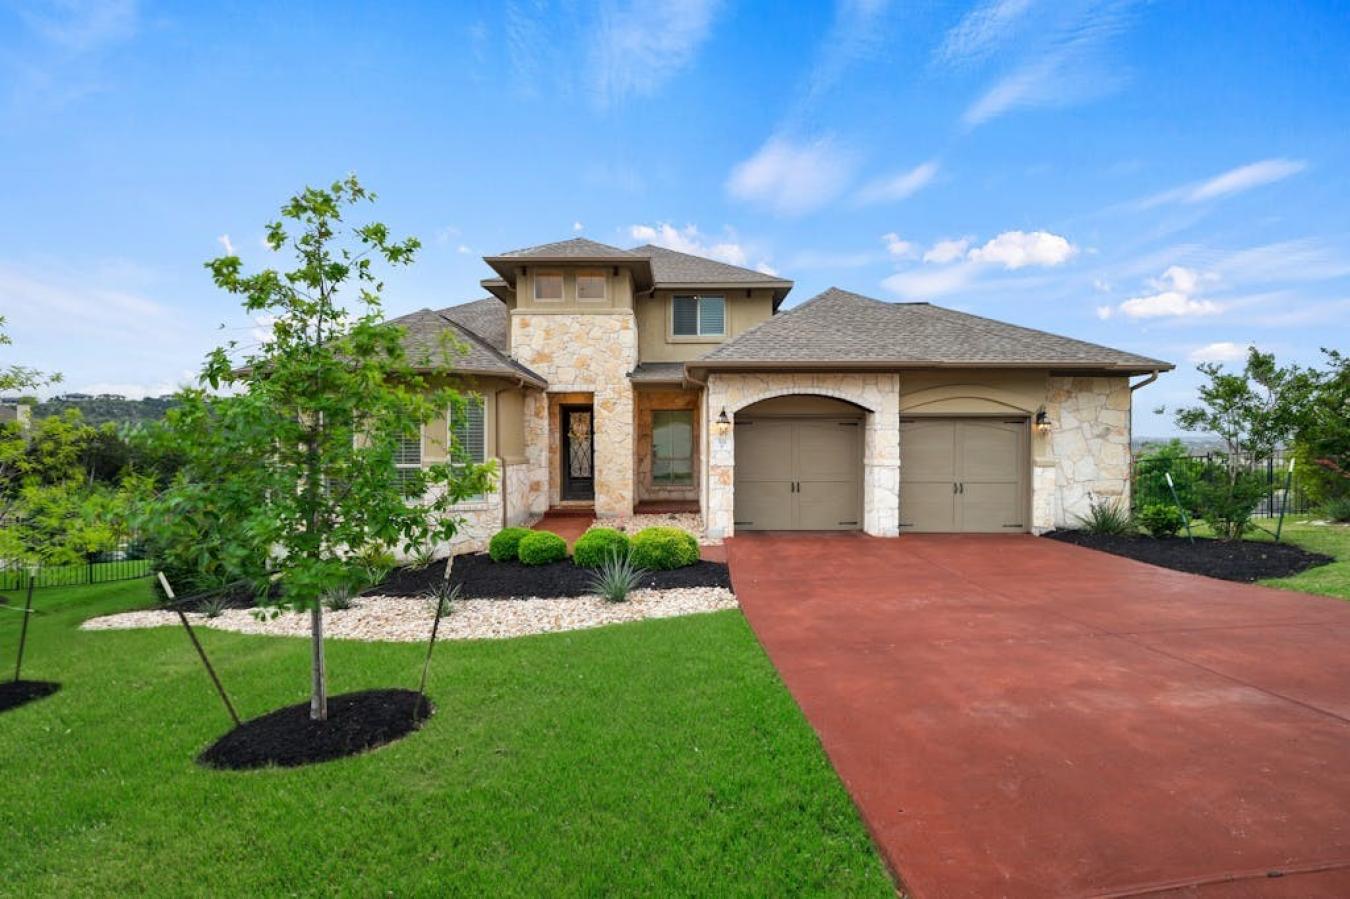 511 Summer Wilson Cove, Lakeway, Texas, 78738, United States, 5 Bedrooms Bedrooms, ,4 BathroomsBathrooms,Residential,For Sale,511 Summer Wilson Cove,1510759